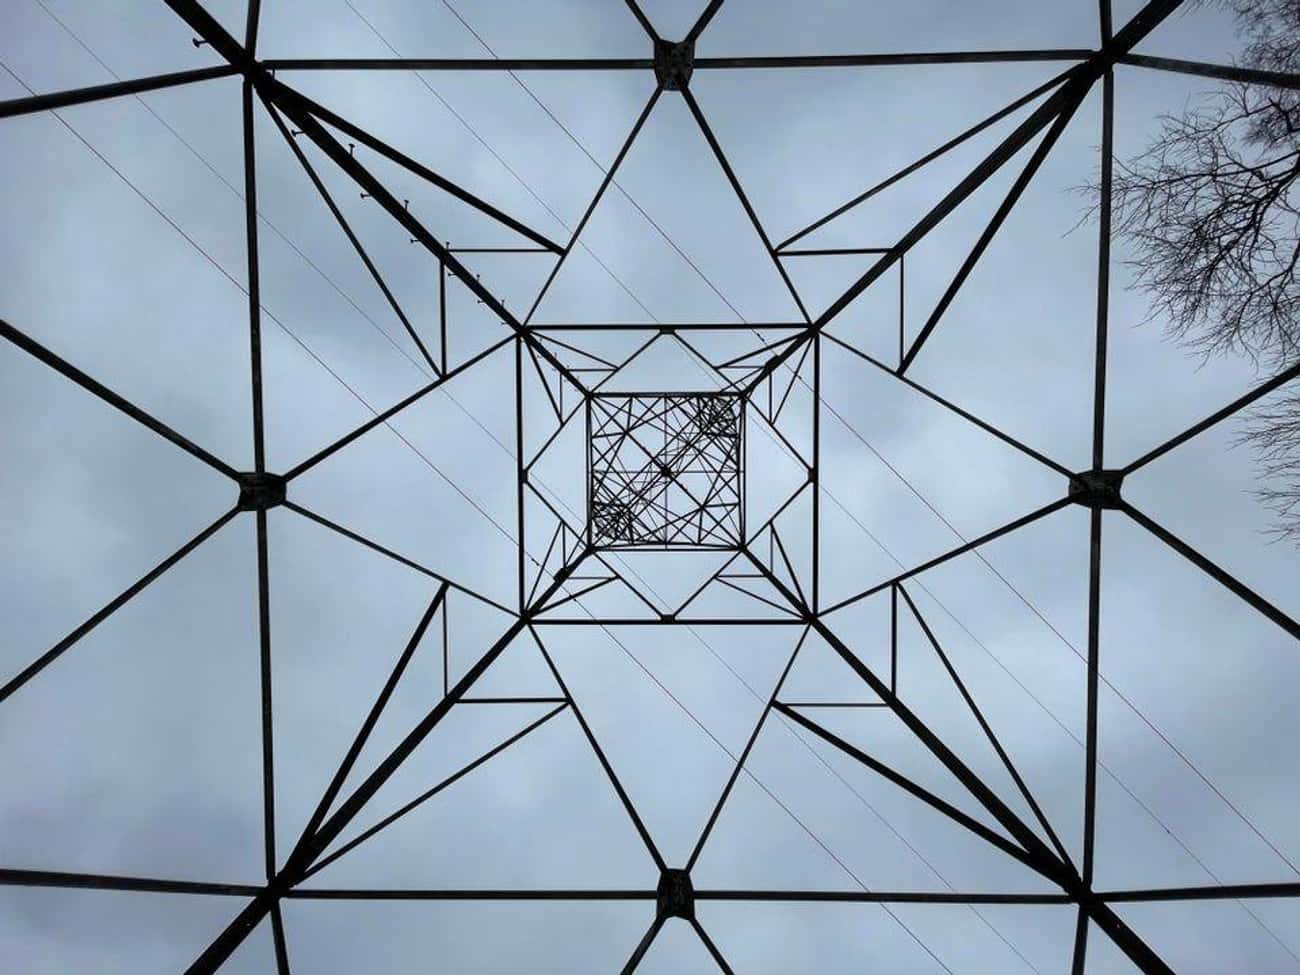 This Upward View Of A Television Tower